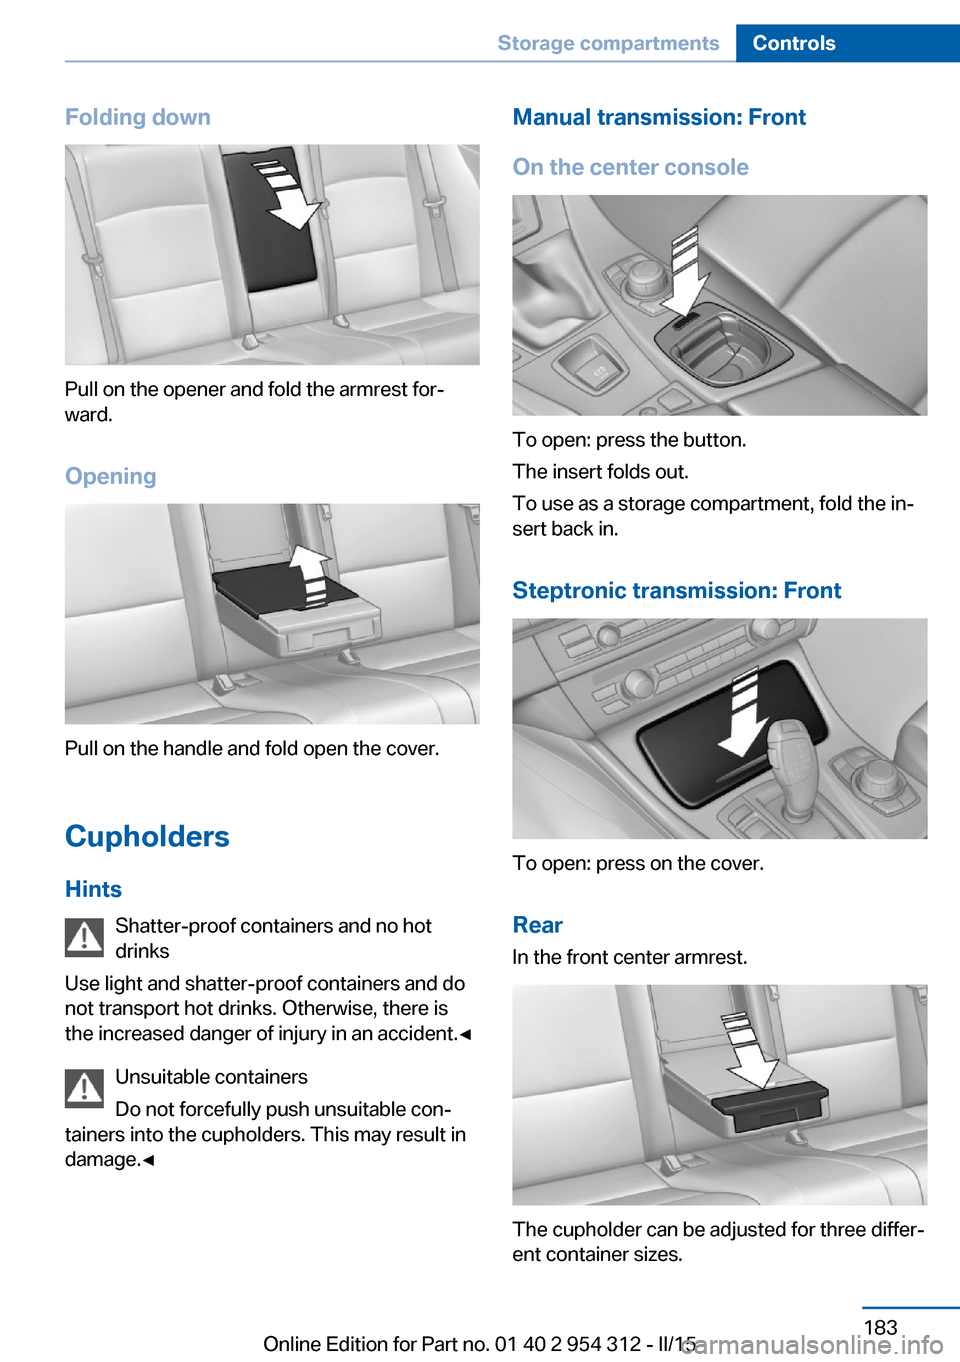 BMW 5 SERIES 2015 F10 Owners Guide Folding down
Pull on the opener and fold the armrest for‐
ward.
Opening
Pull on the handle and fold open the cover.
Cupholders Hints Shatter-proof containers and no hot
drinks
Use light and shatter-